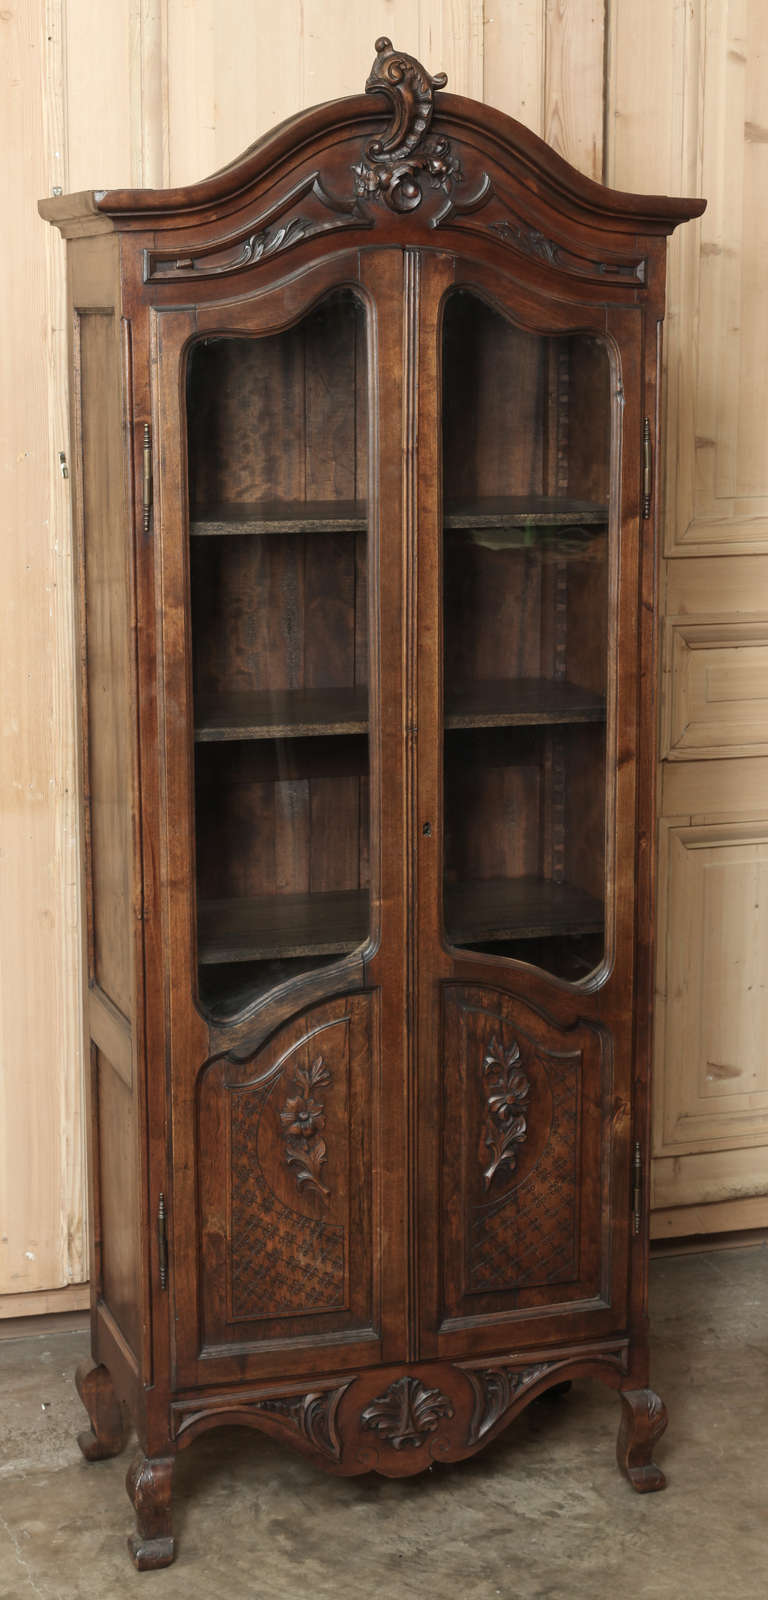 Featuring styling inspired by the rococo movement, a favorite of Louis XV, this Antique Country French Vitrine was hand-crafted from solid fruitwood, and features carved embellishments from the cartouche atop the arched crown to the boldly scrolled